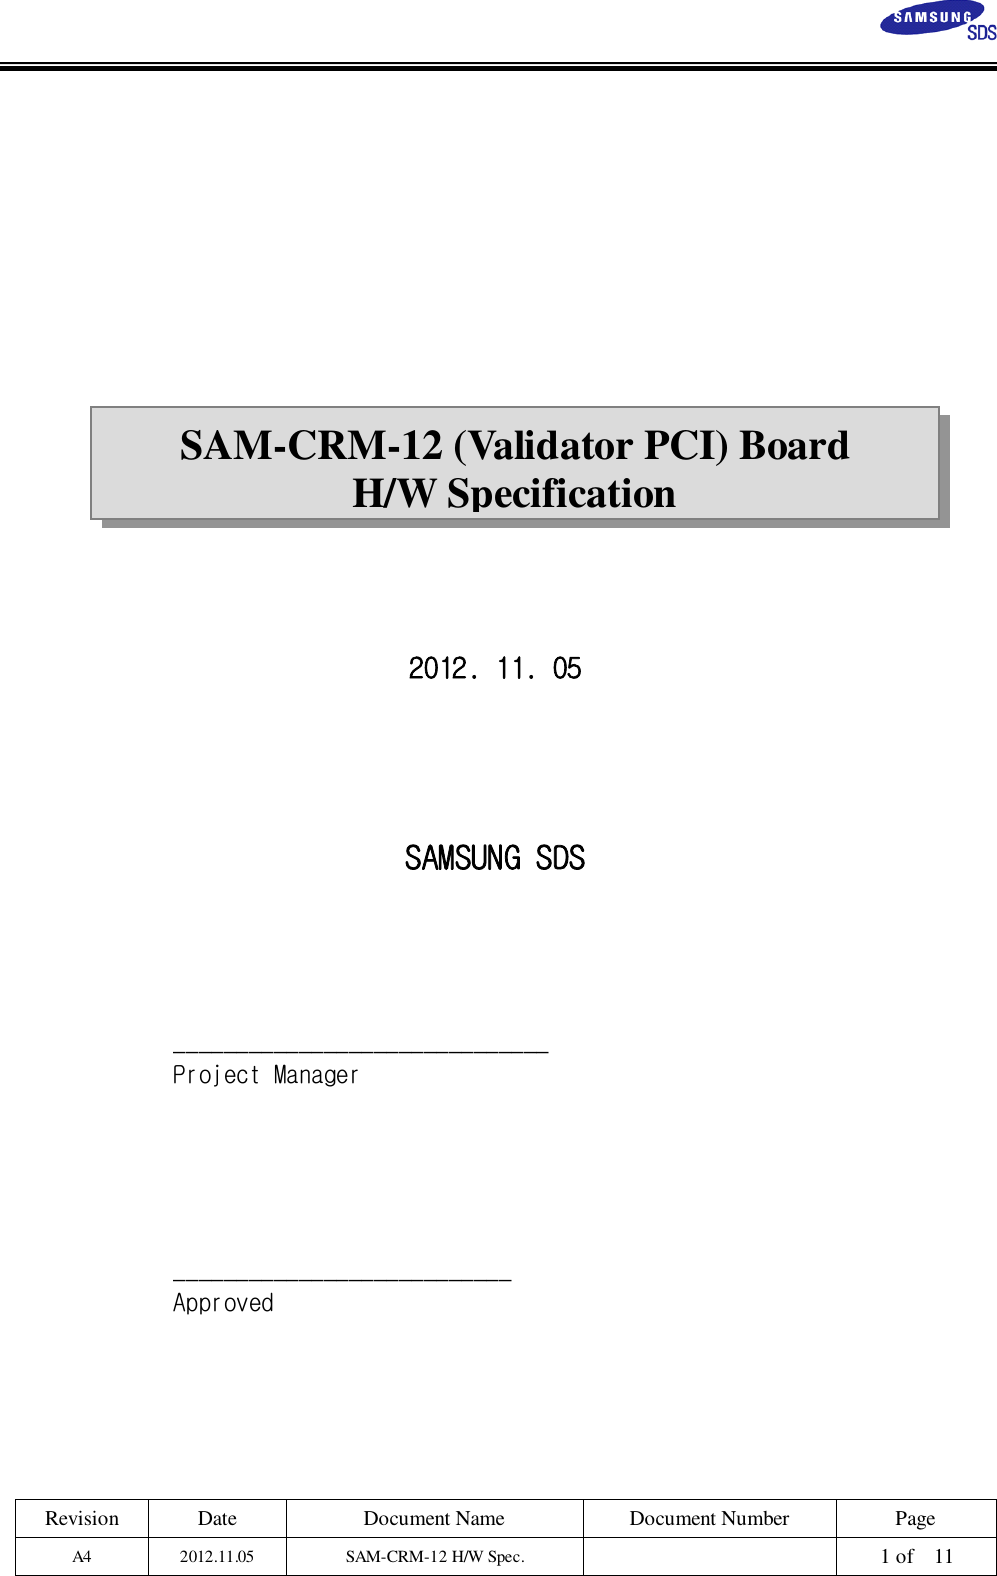 Revision Date Document Name Document Number PageA4 2012.11.05 SAM-CRM-12 H/W Spec. 1 of 11SAM-CRM-12(ValidatorPCI)BoardH/W Specification2012. 11. 05SAMSUNG SDS______________________________Project Manager___________________________Approved